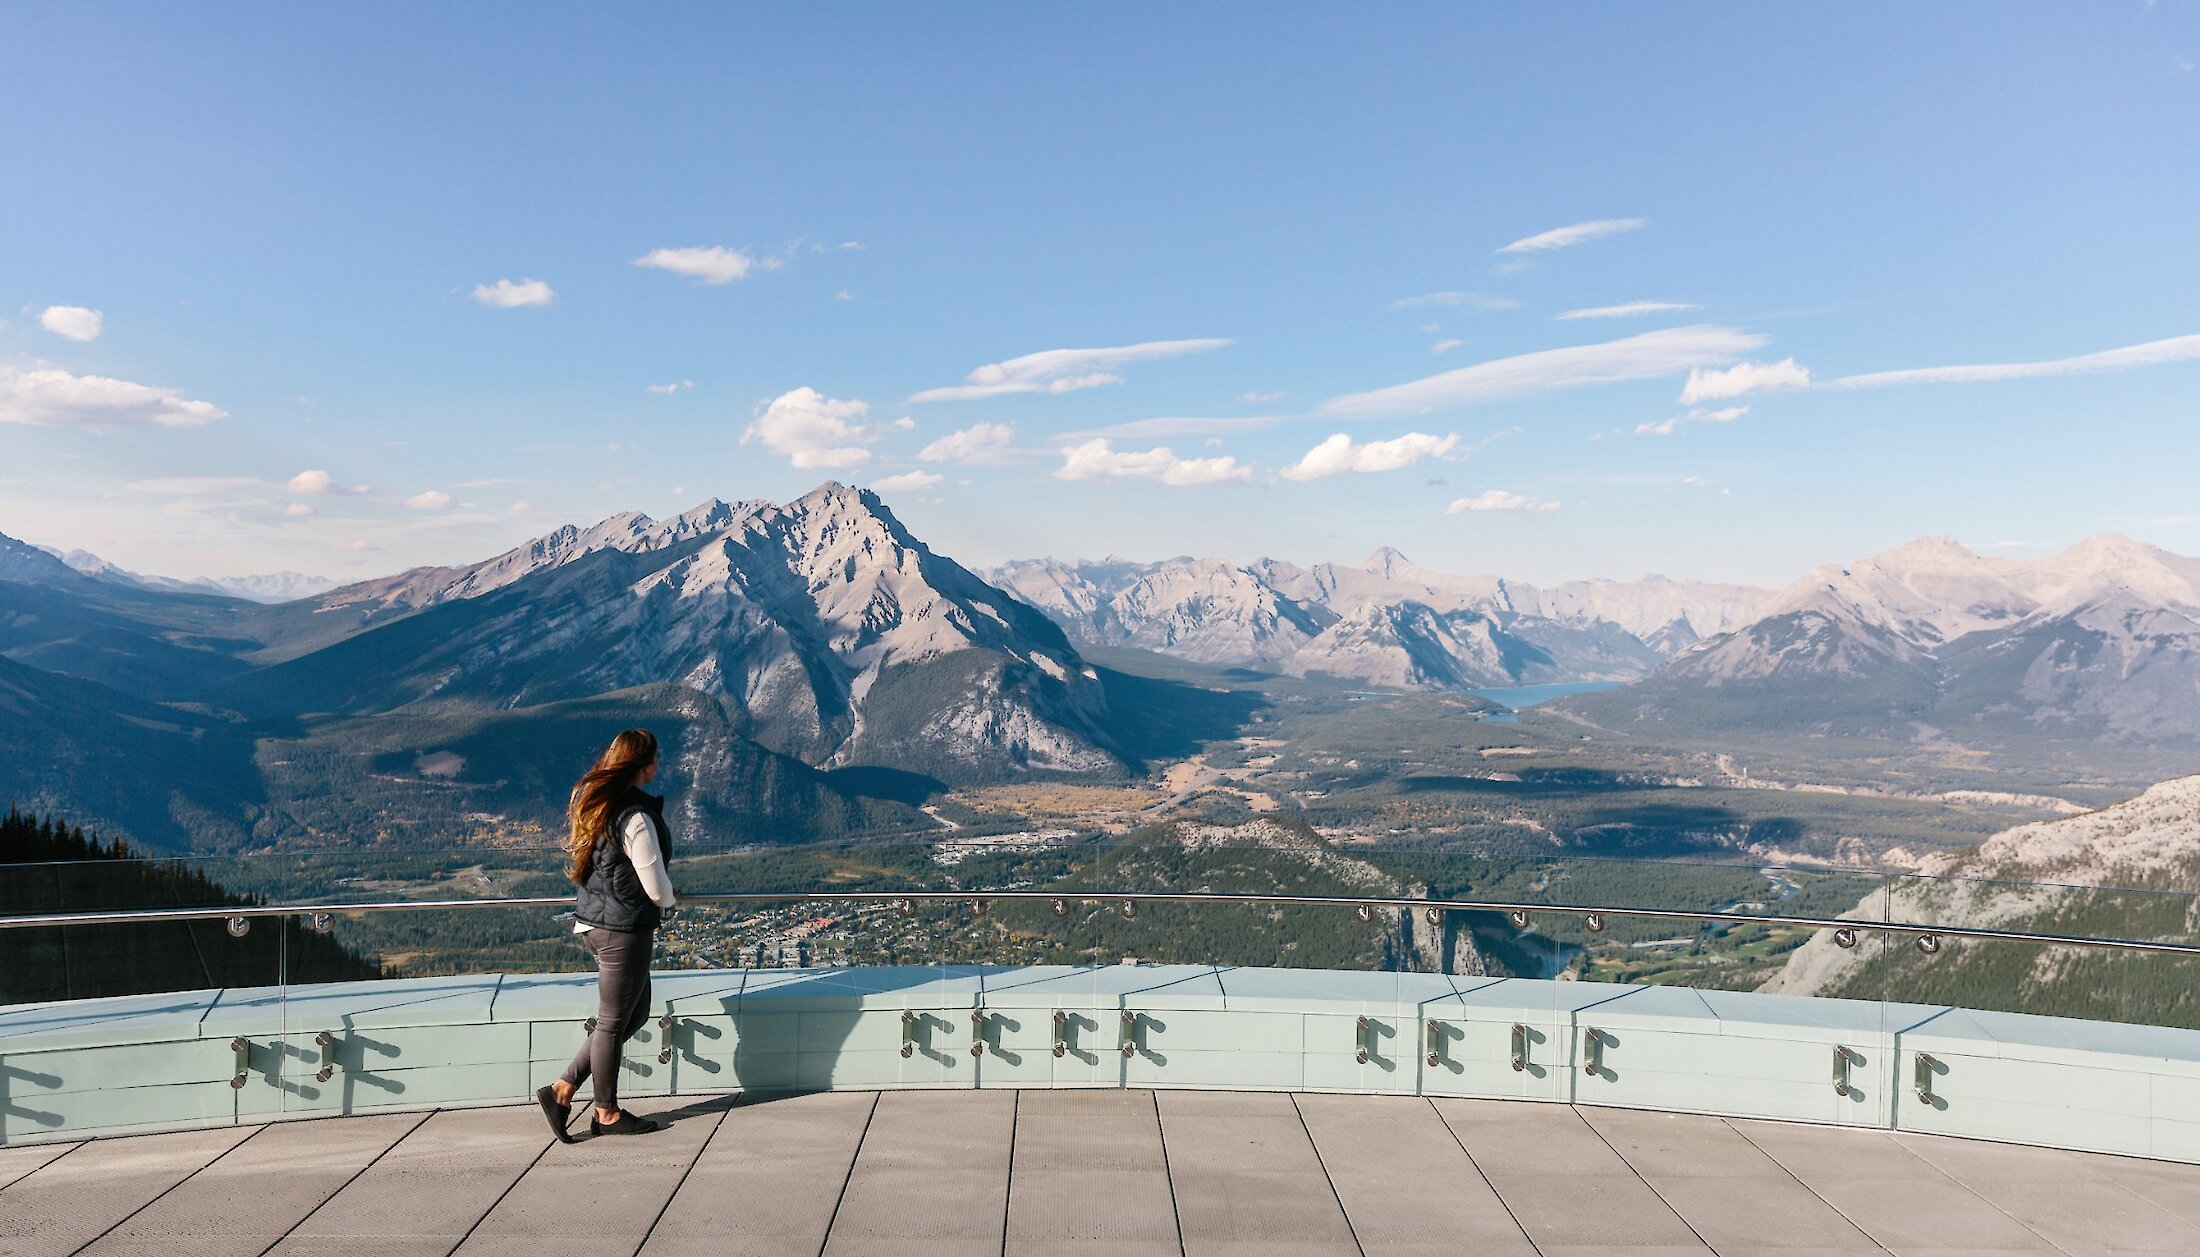 Admiring the views from the top of the Banff Gondola in summer